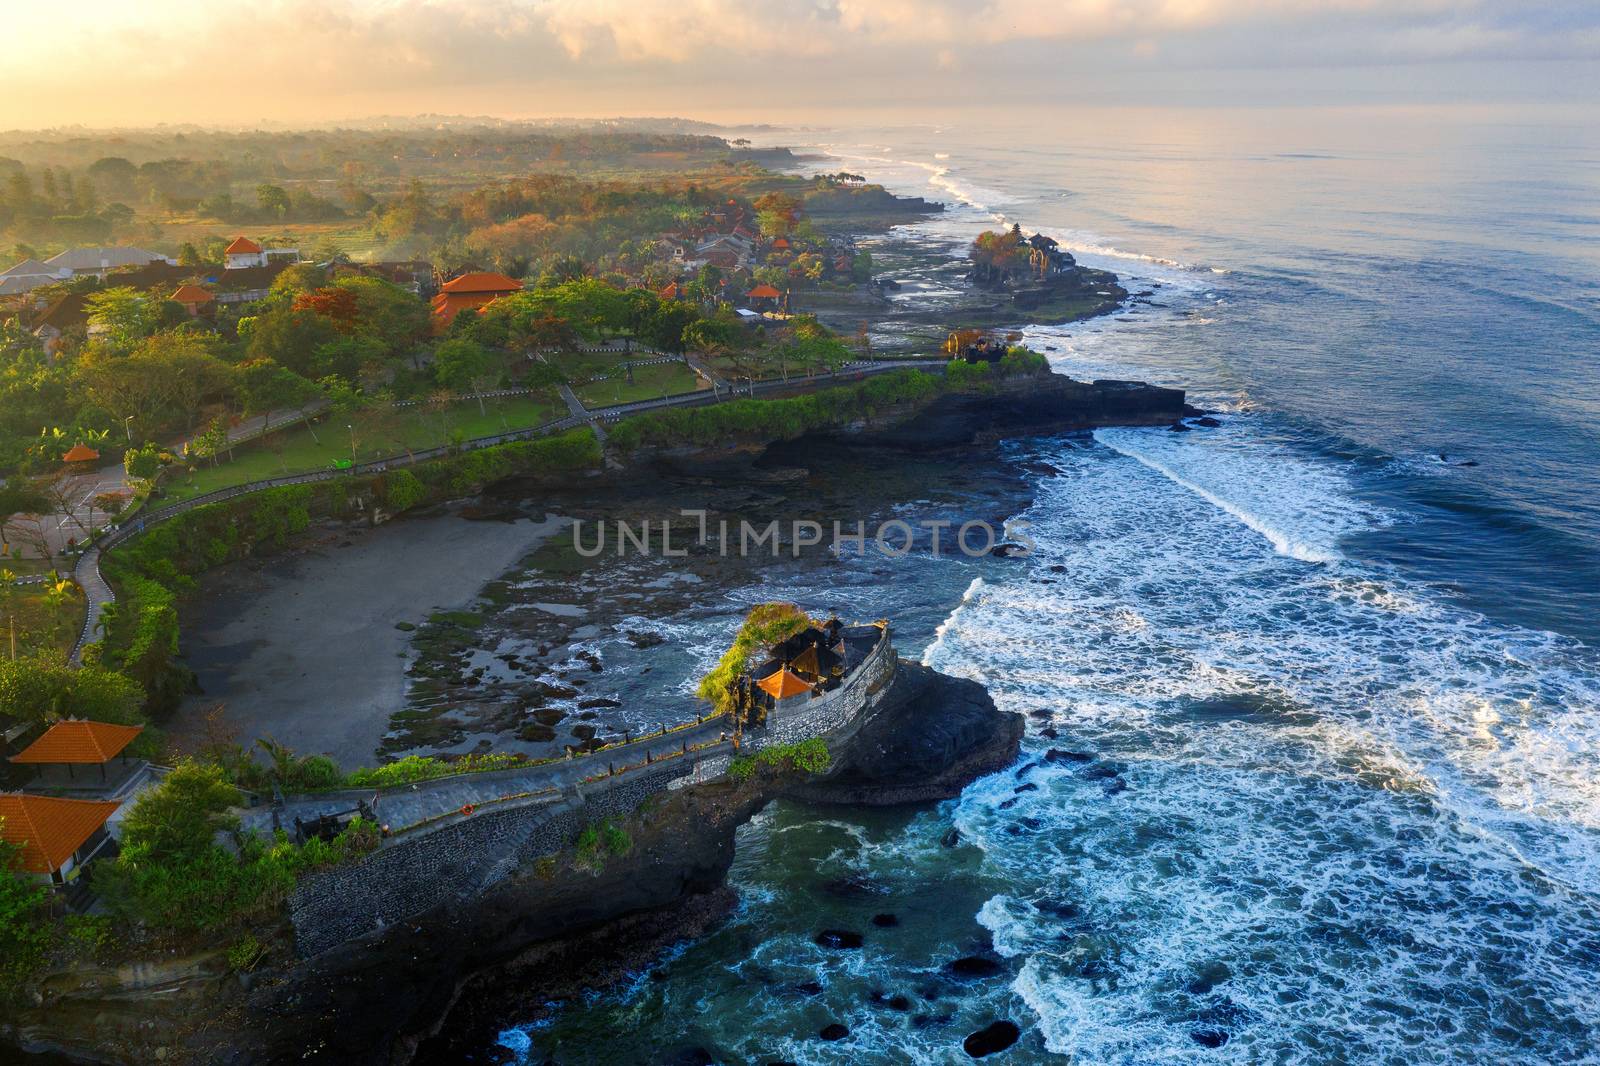 Aerial view of Tanah lot temple in Bali, Indonesia. by gutarphotoghaphy